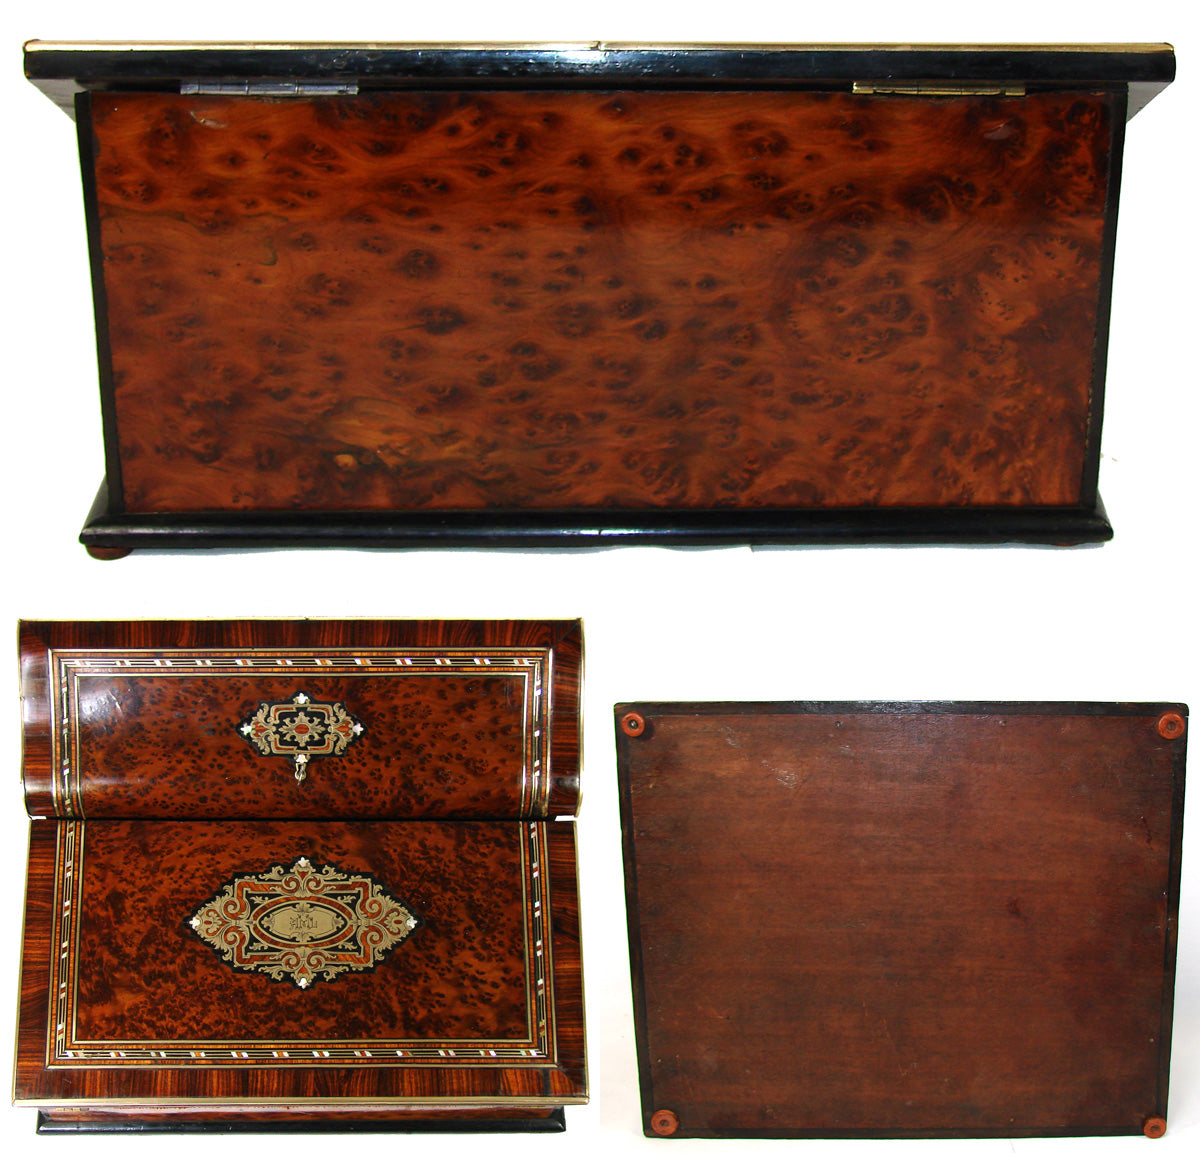 Large 13.5" Wide Antique French Writer's Cabinet, Lap Desk, Ecritoire, Burled Veneers & Boulle Style Inlay